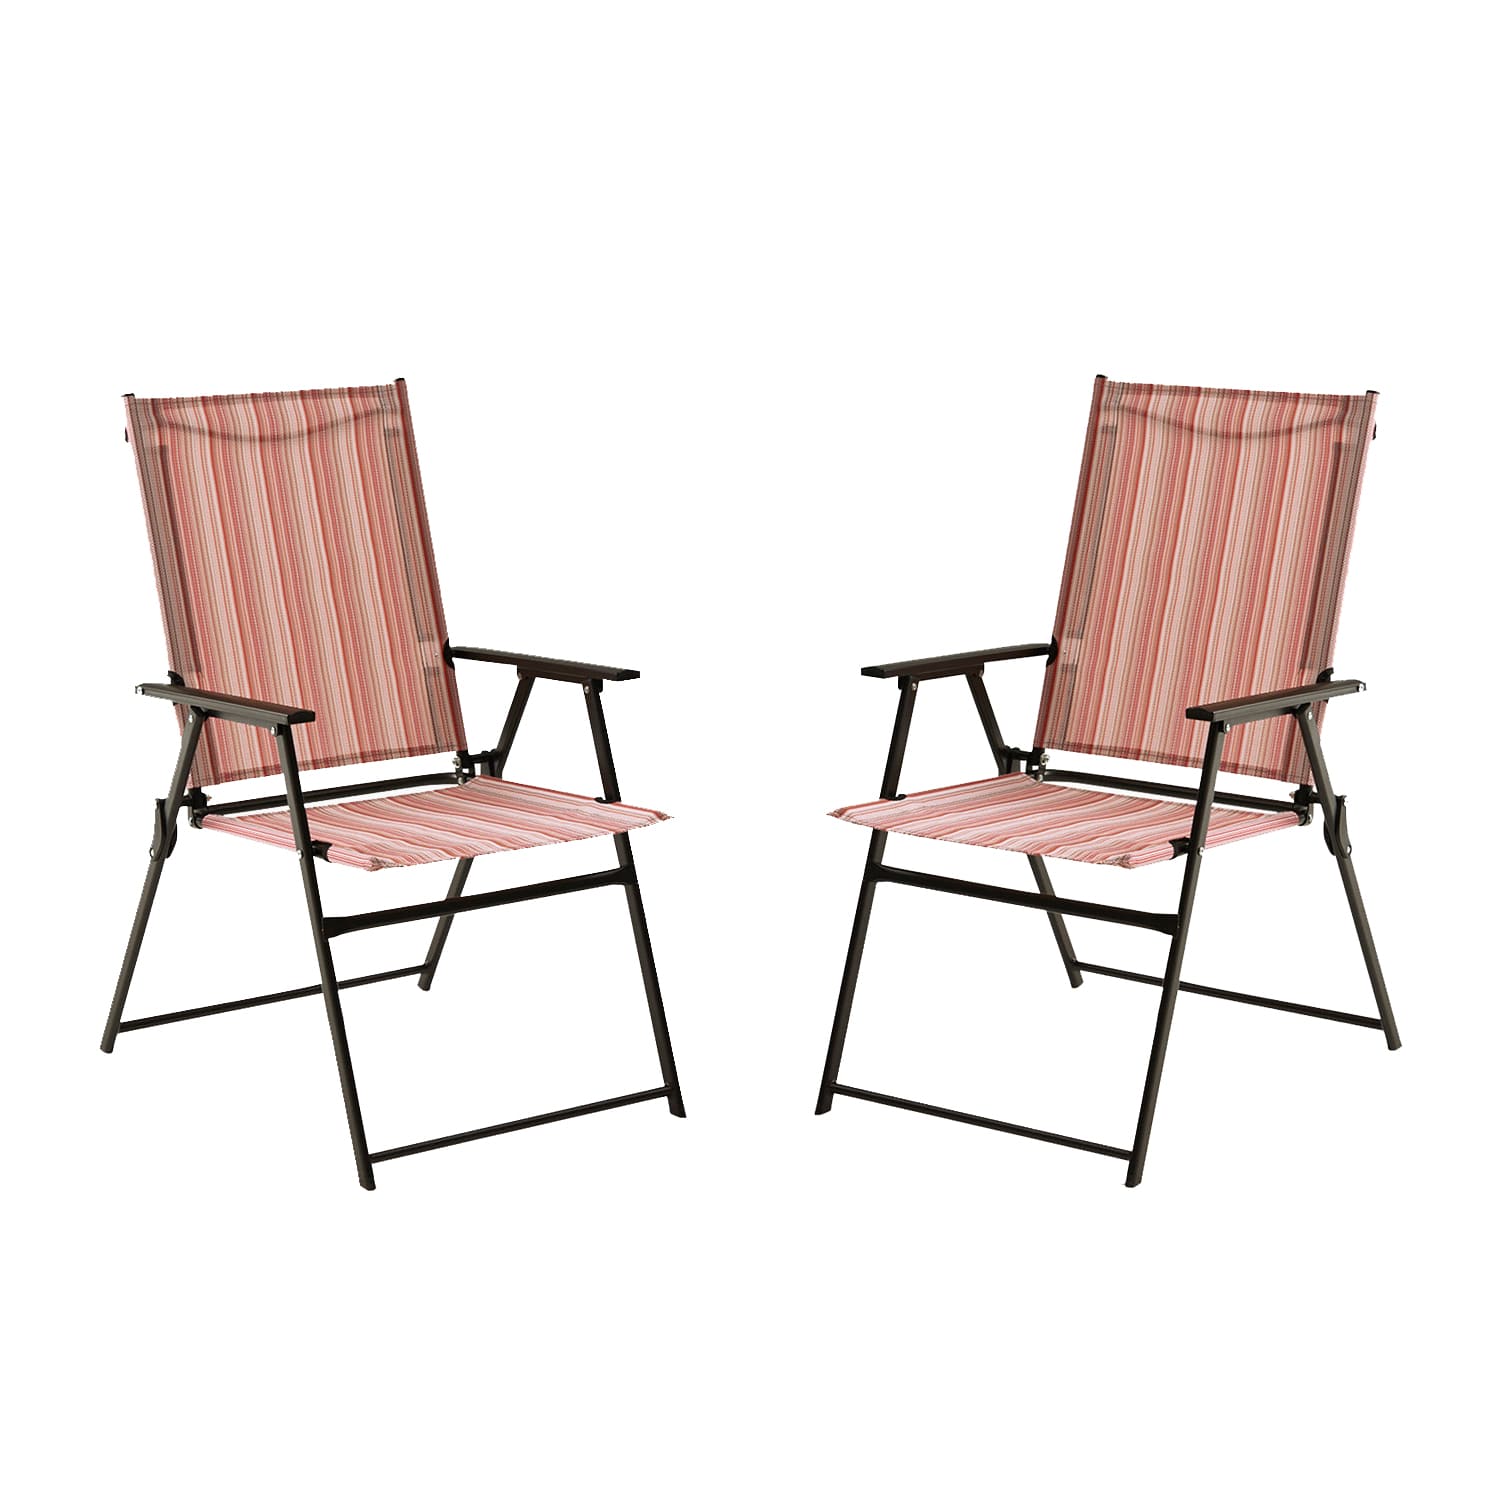 Vicllax Outdoor Folding Chairs, Patio Lawn Garden Chair Set of 2/4/6